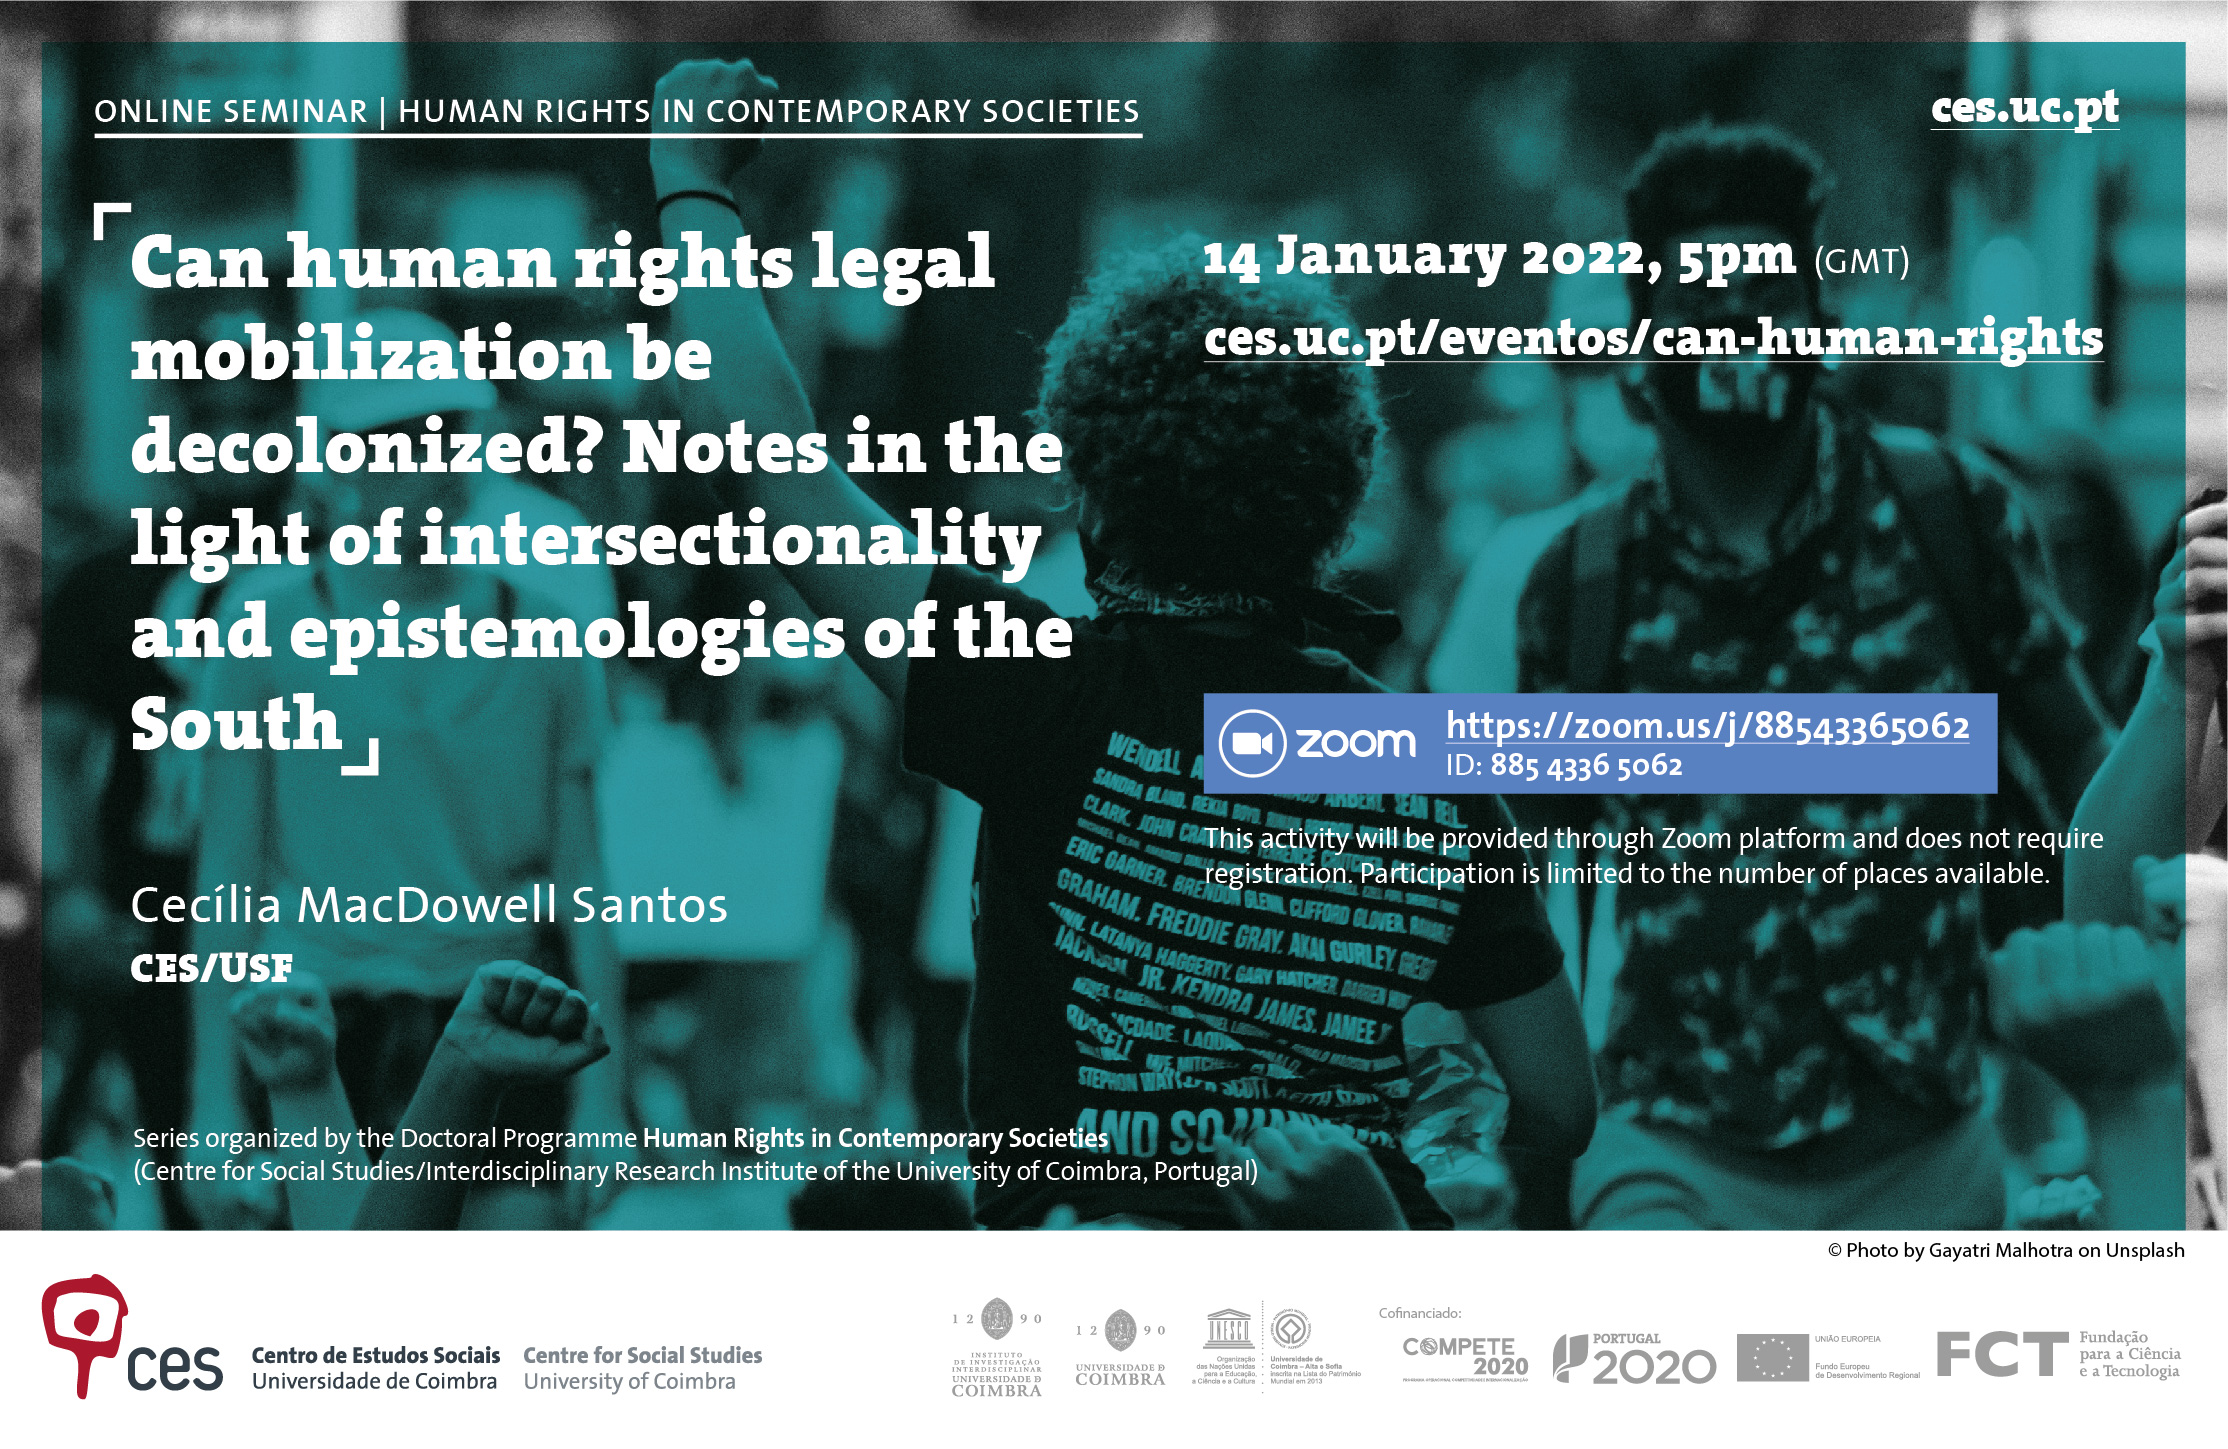 Can human rights legal mobilization be decolonized? Notes in the light of intersectionality and epistemologies of the South<span id="edit_36863"><script>$(function() { $('#edit_36863').load( "/myces/user/editobj.php?tipo=evento&id=36863" ); });</script></span>